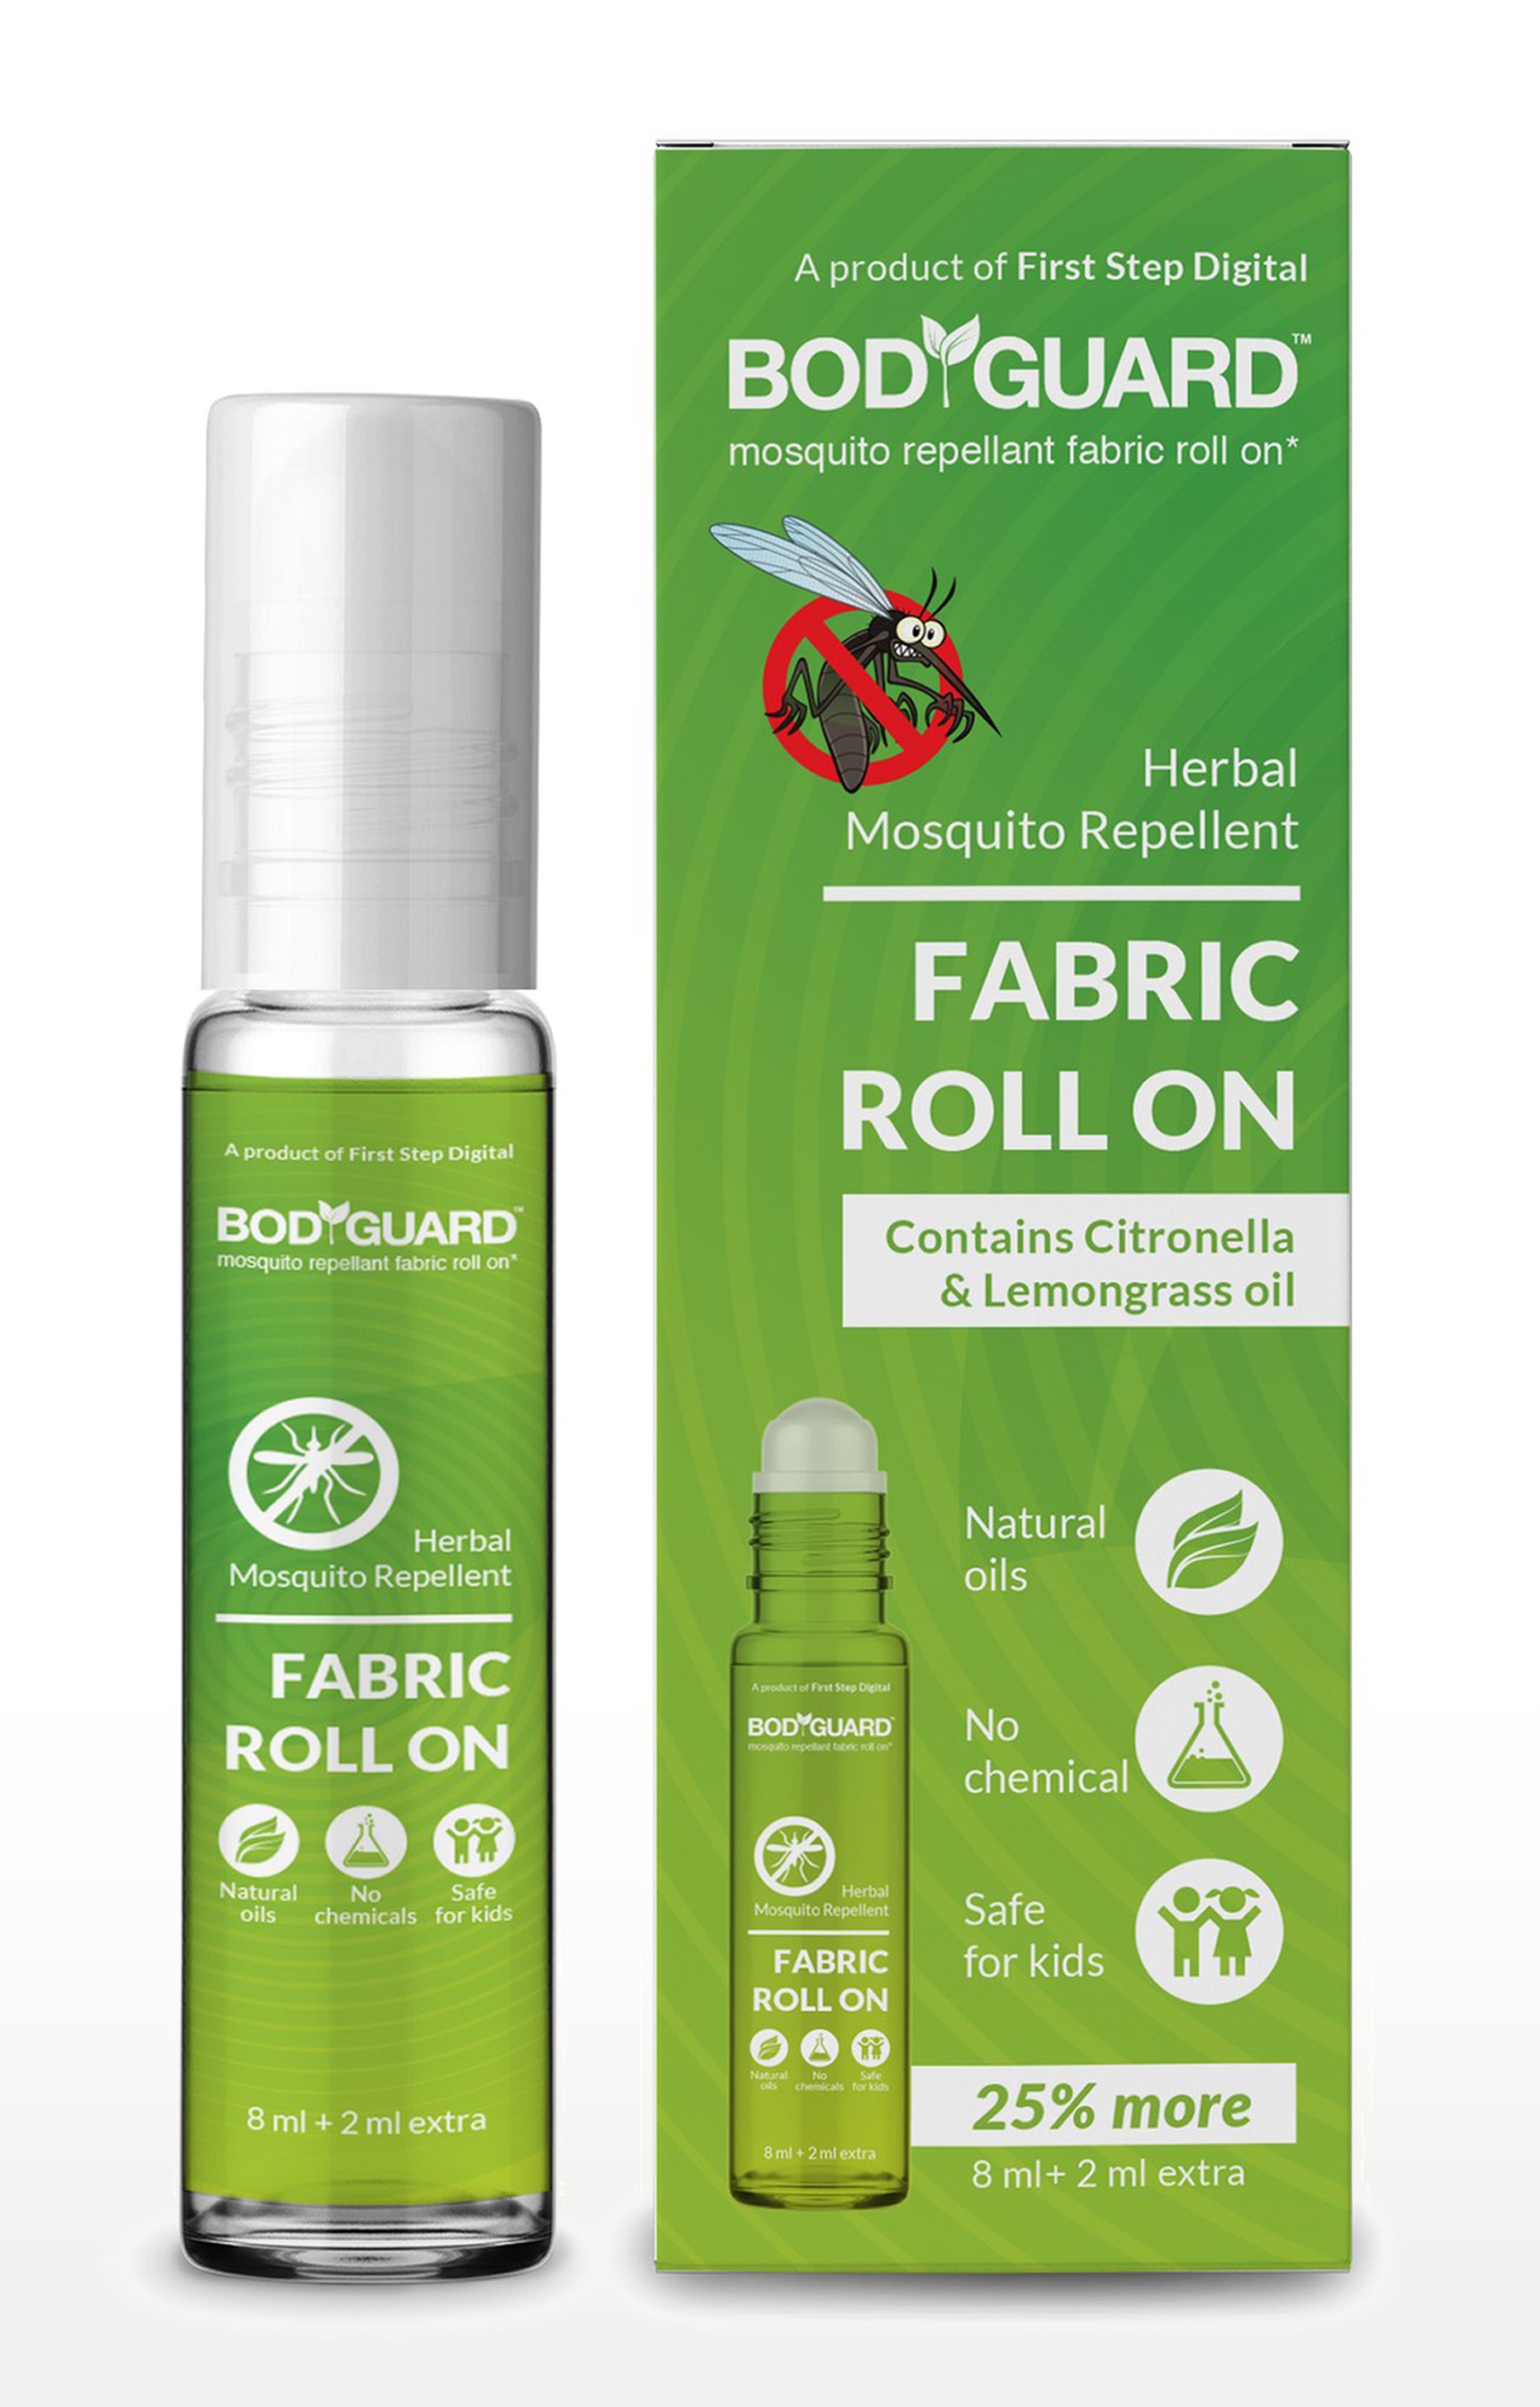 Bodyguard | Bodyguard Herbal Fabric Roll On with Citronella and Lemongrass Oil - 8 ml + 2 ml Extra